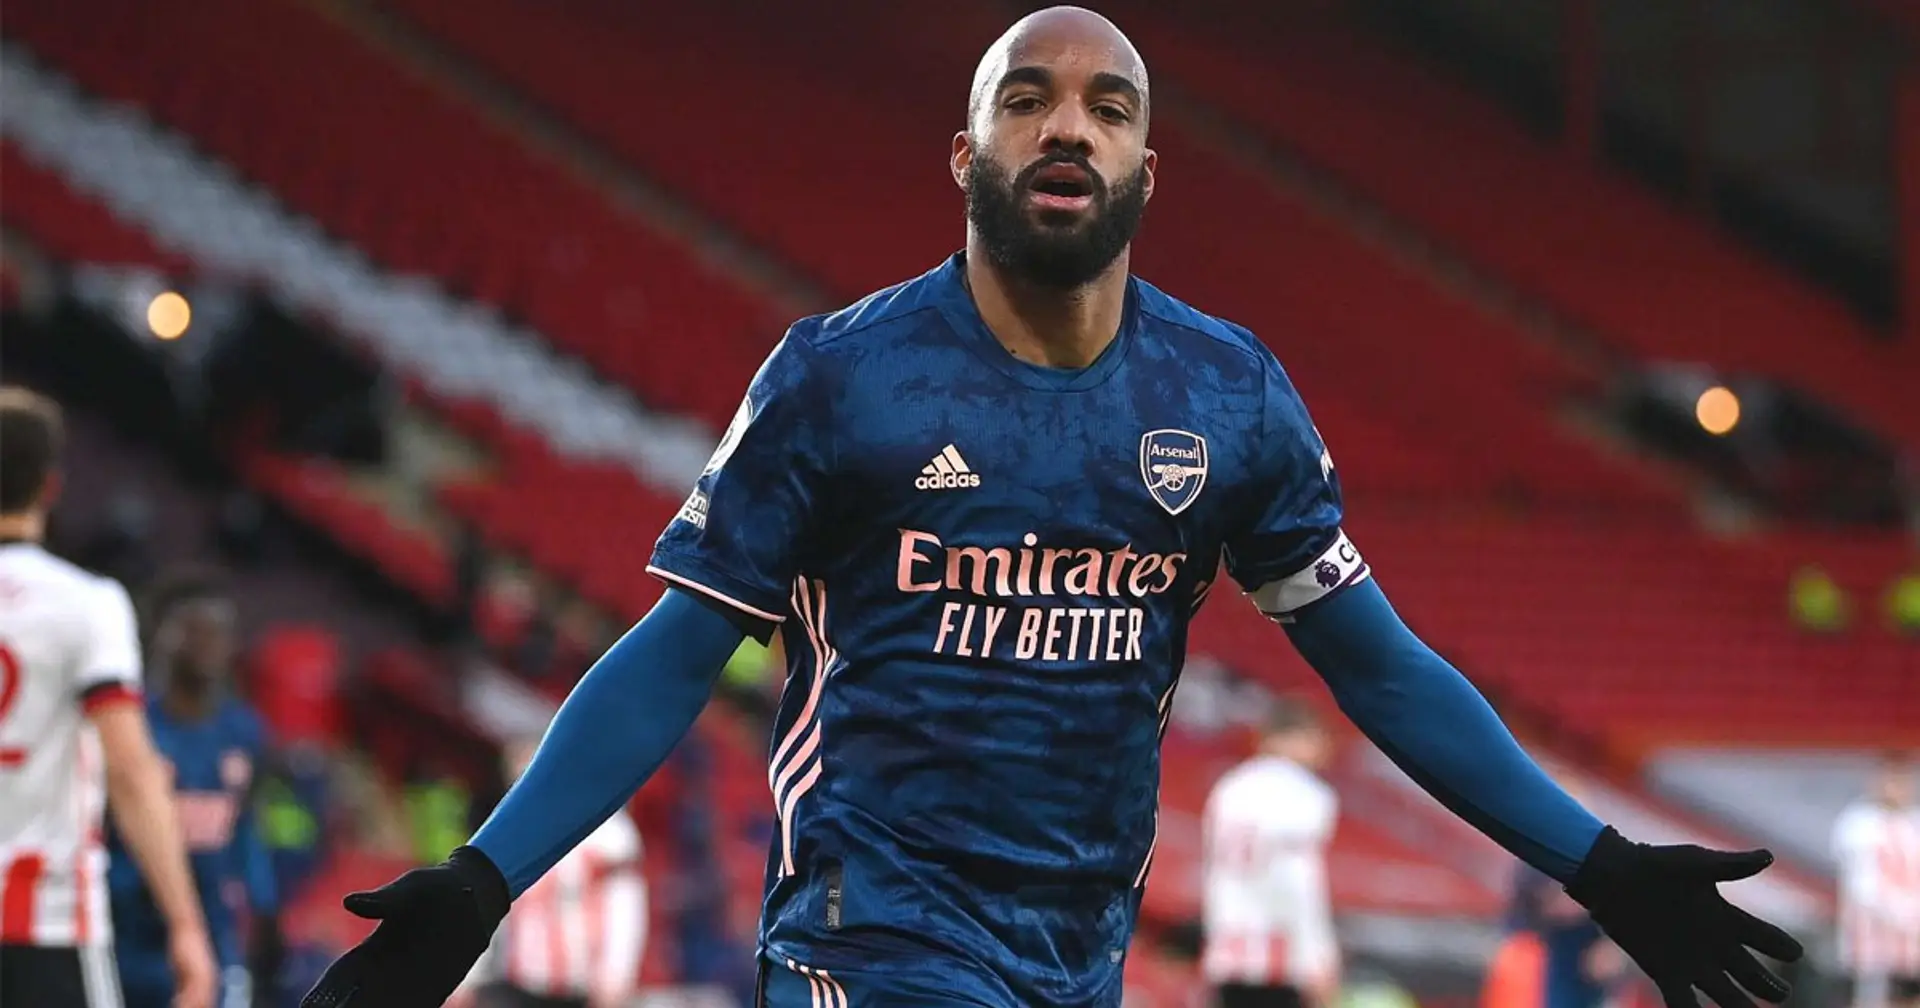 Lacazette named in PL Team of the Week & 3 more big Arsenal stories you might've missed